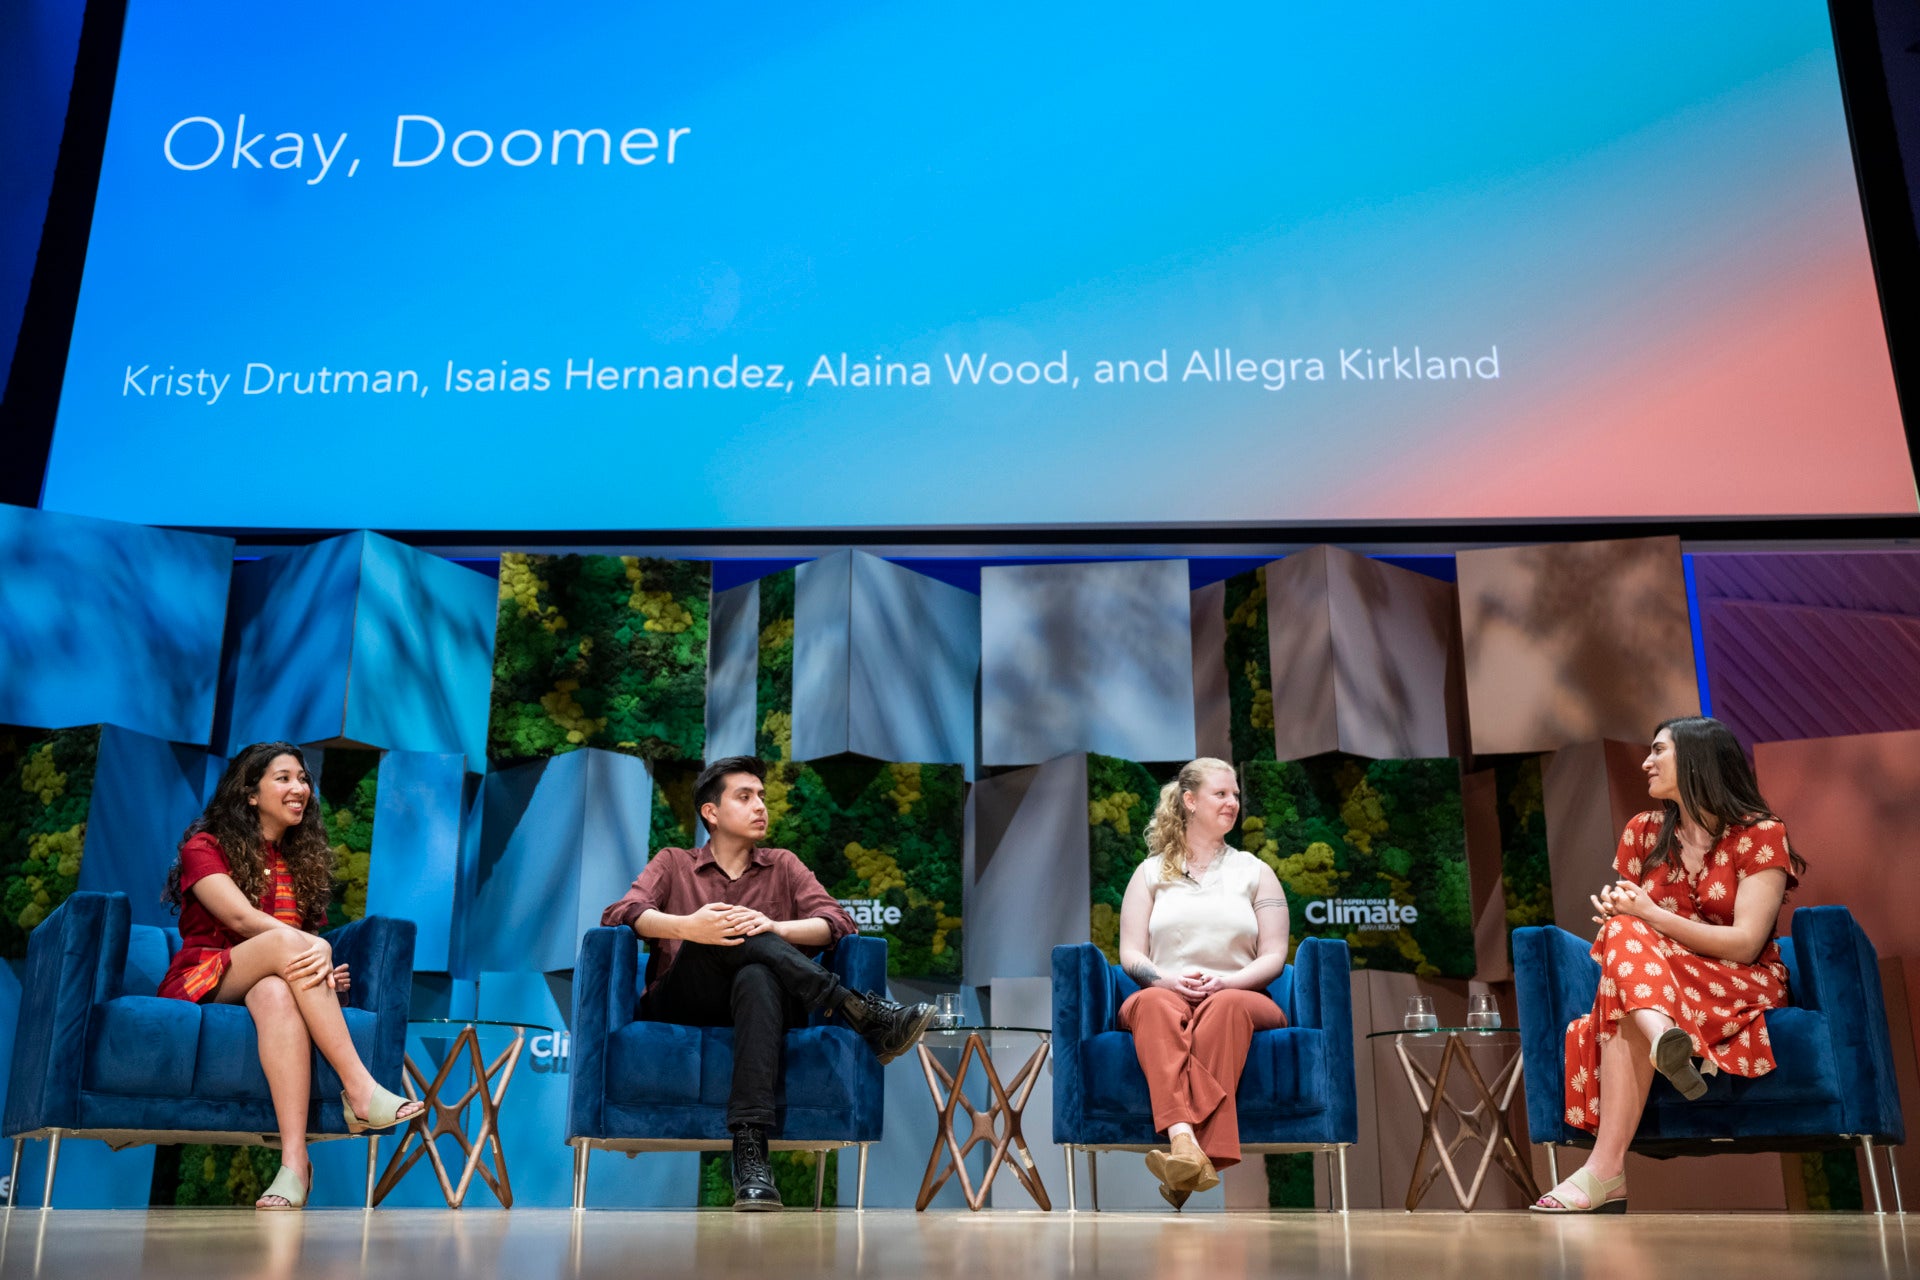 Four people sit in blue velvet armchairs on a colorful stage. Above them, a slide is projected that reads: "Okay, Doomer," followed by the names of the panelists. The panelists are looking to their left, listening intently to a fellow speaker.